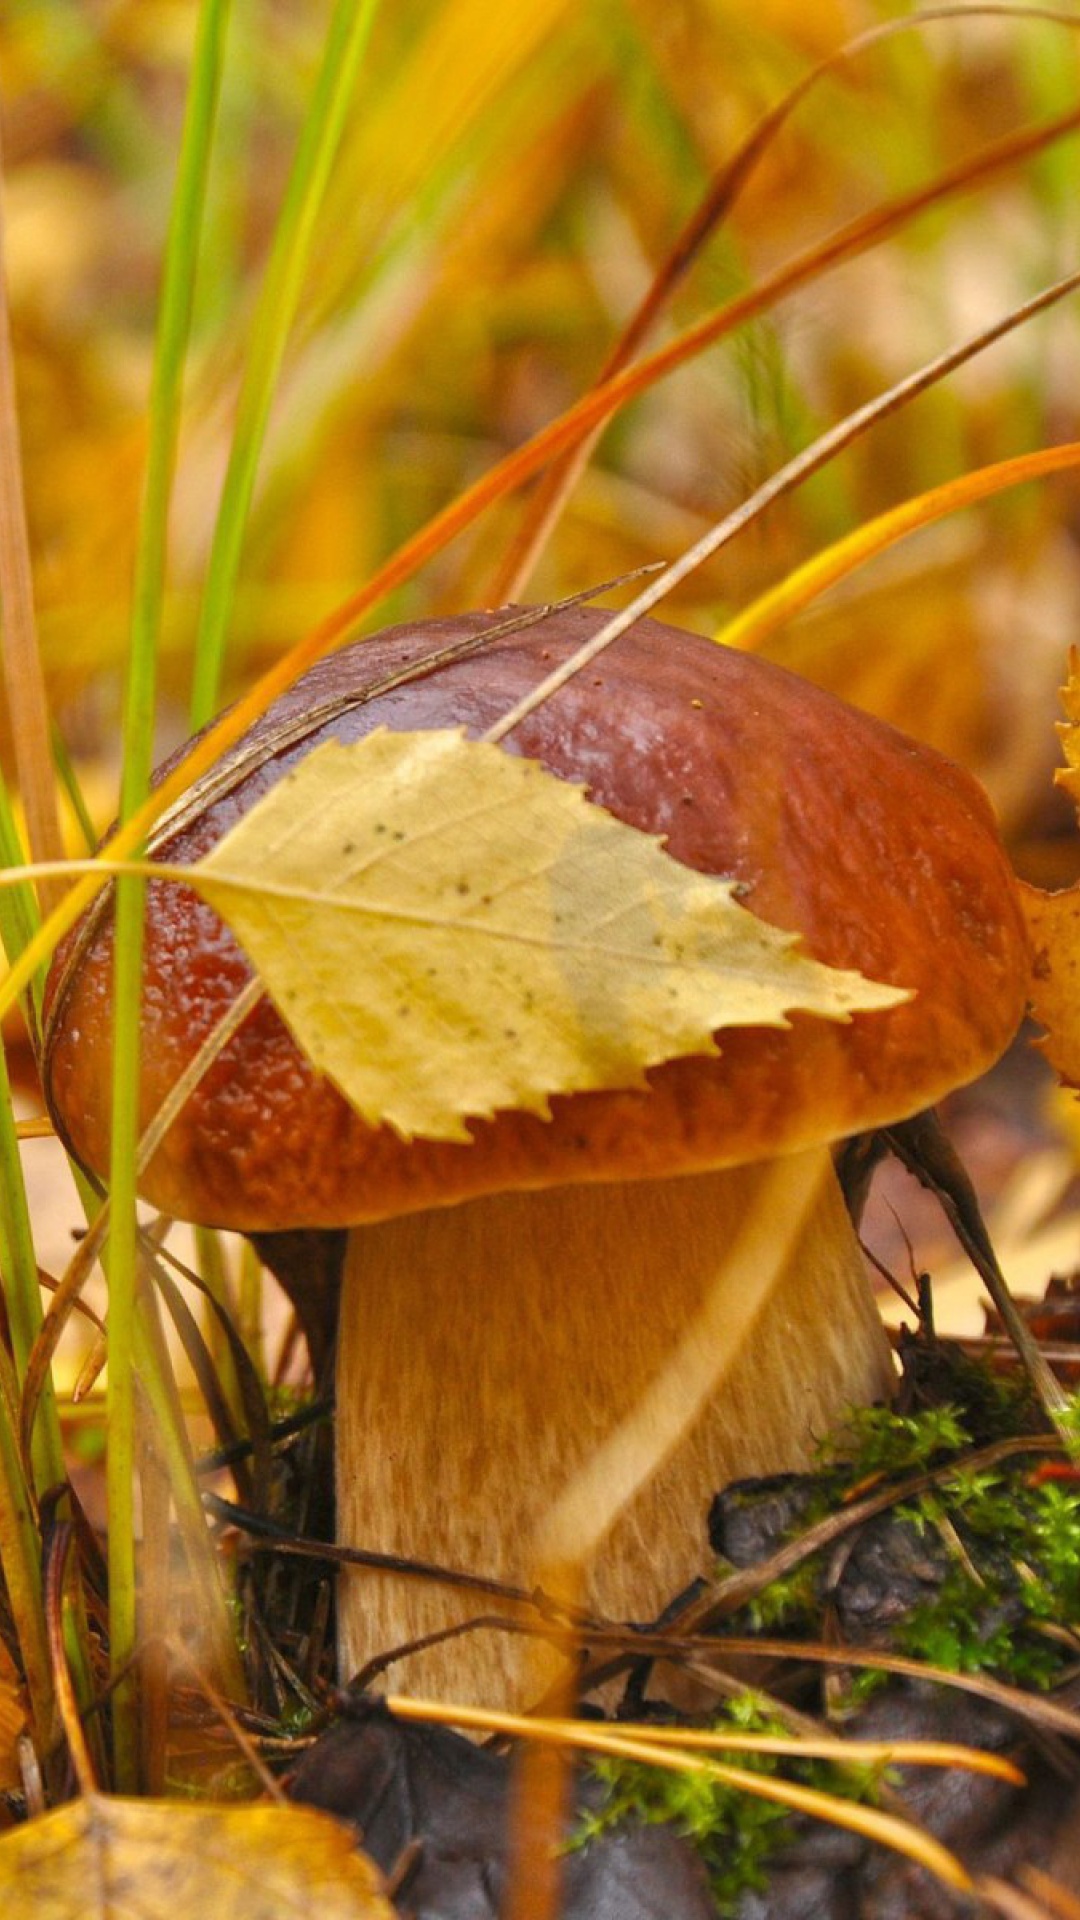 Autumn Mushrooms with Yellow Leaves wallpaper 1080x1920